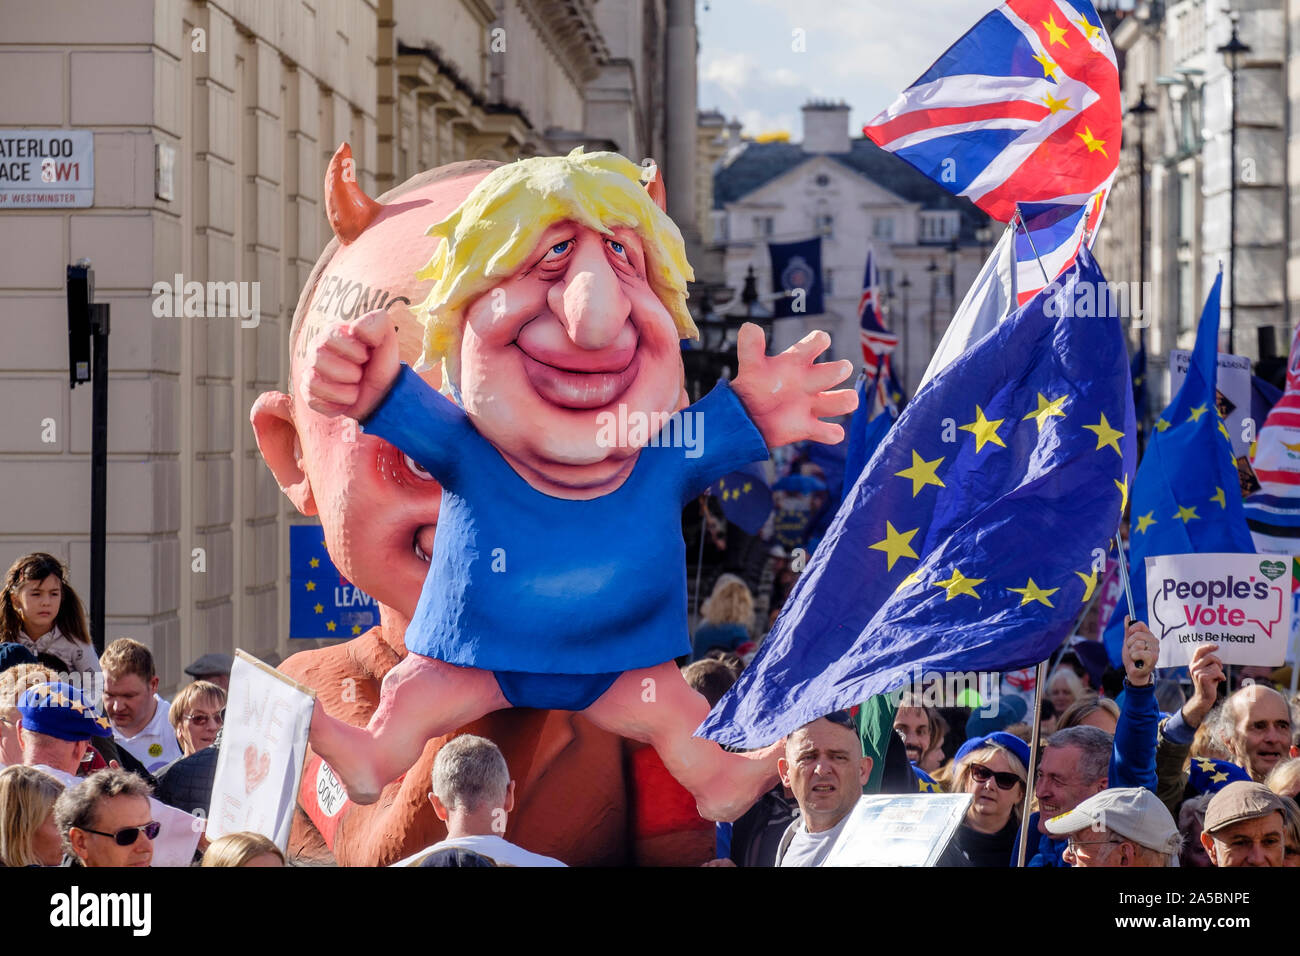 London, UK. 19th October 2019. Boris Johnson puppet is paraded along route of People's March in central London Stock Photo